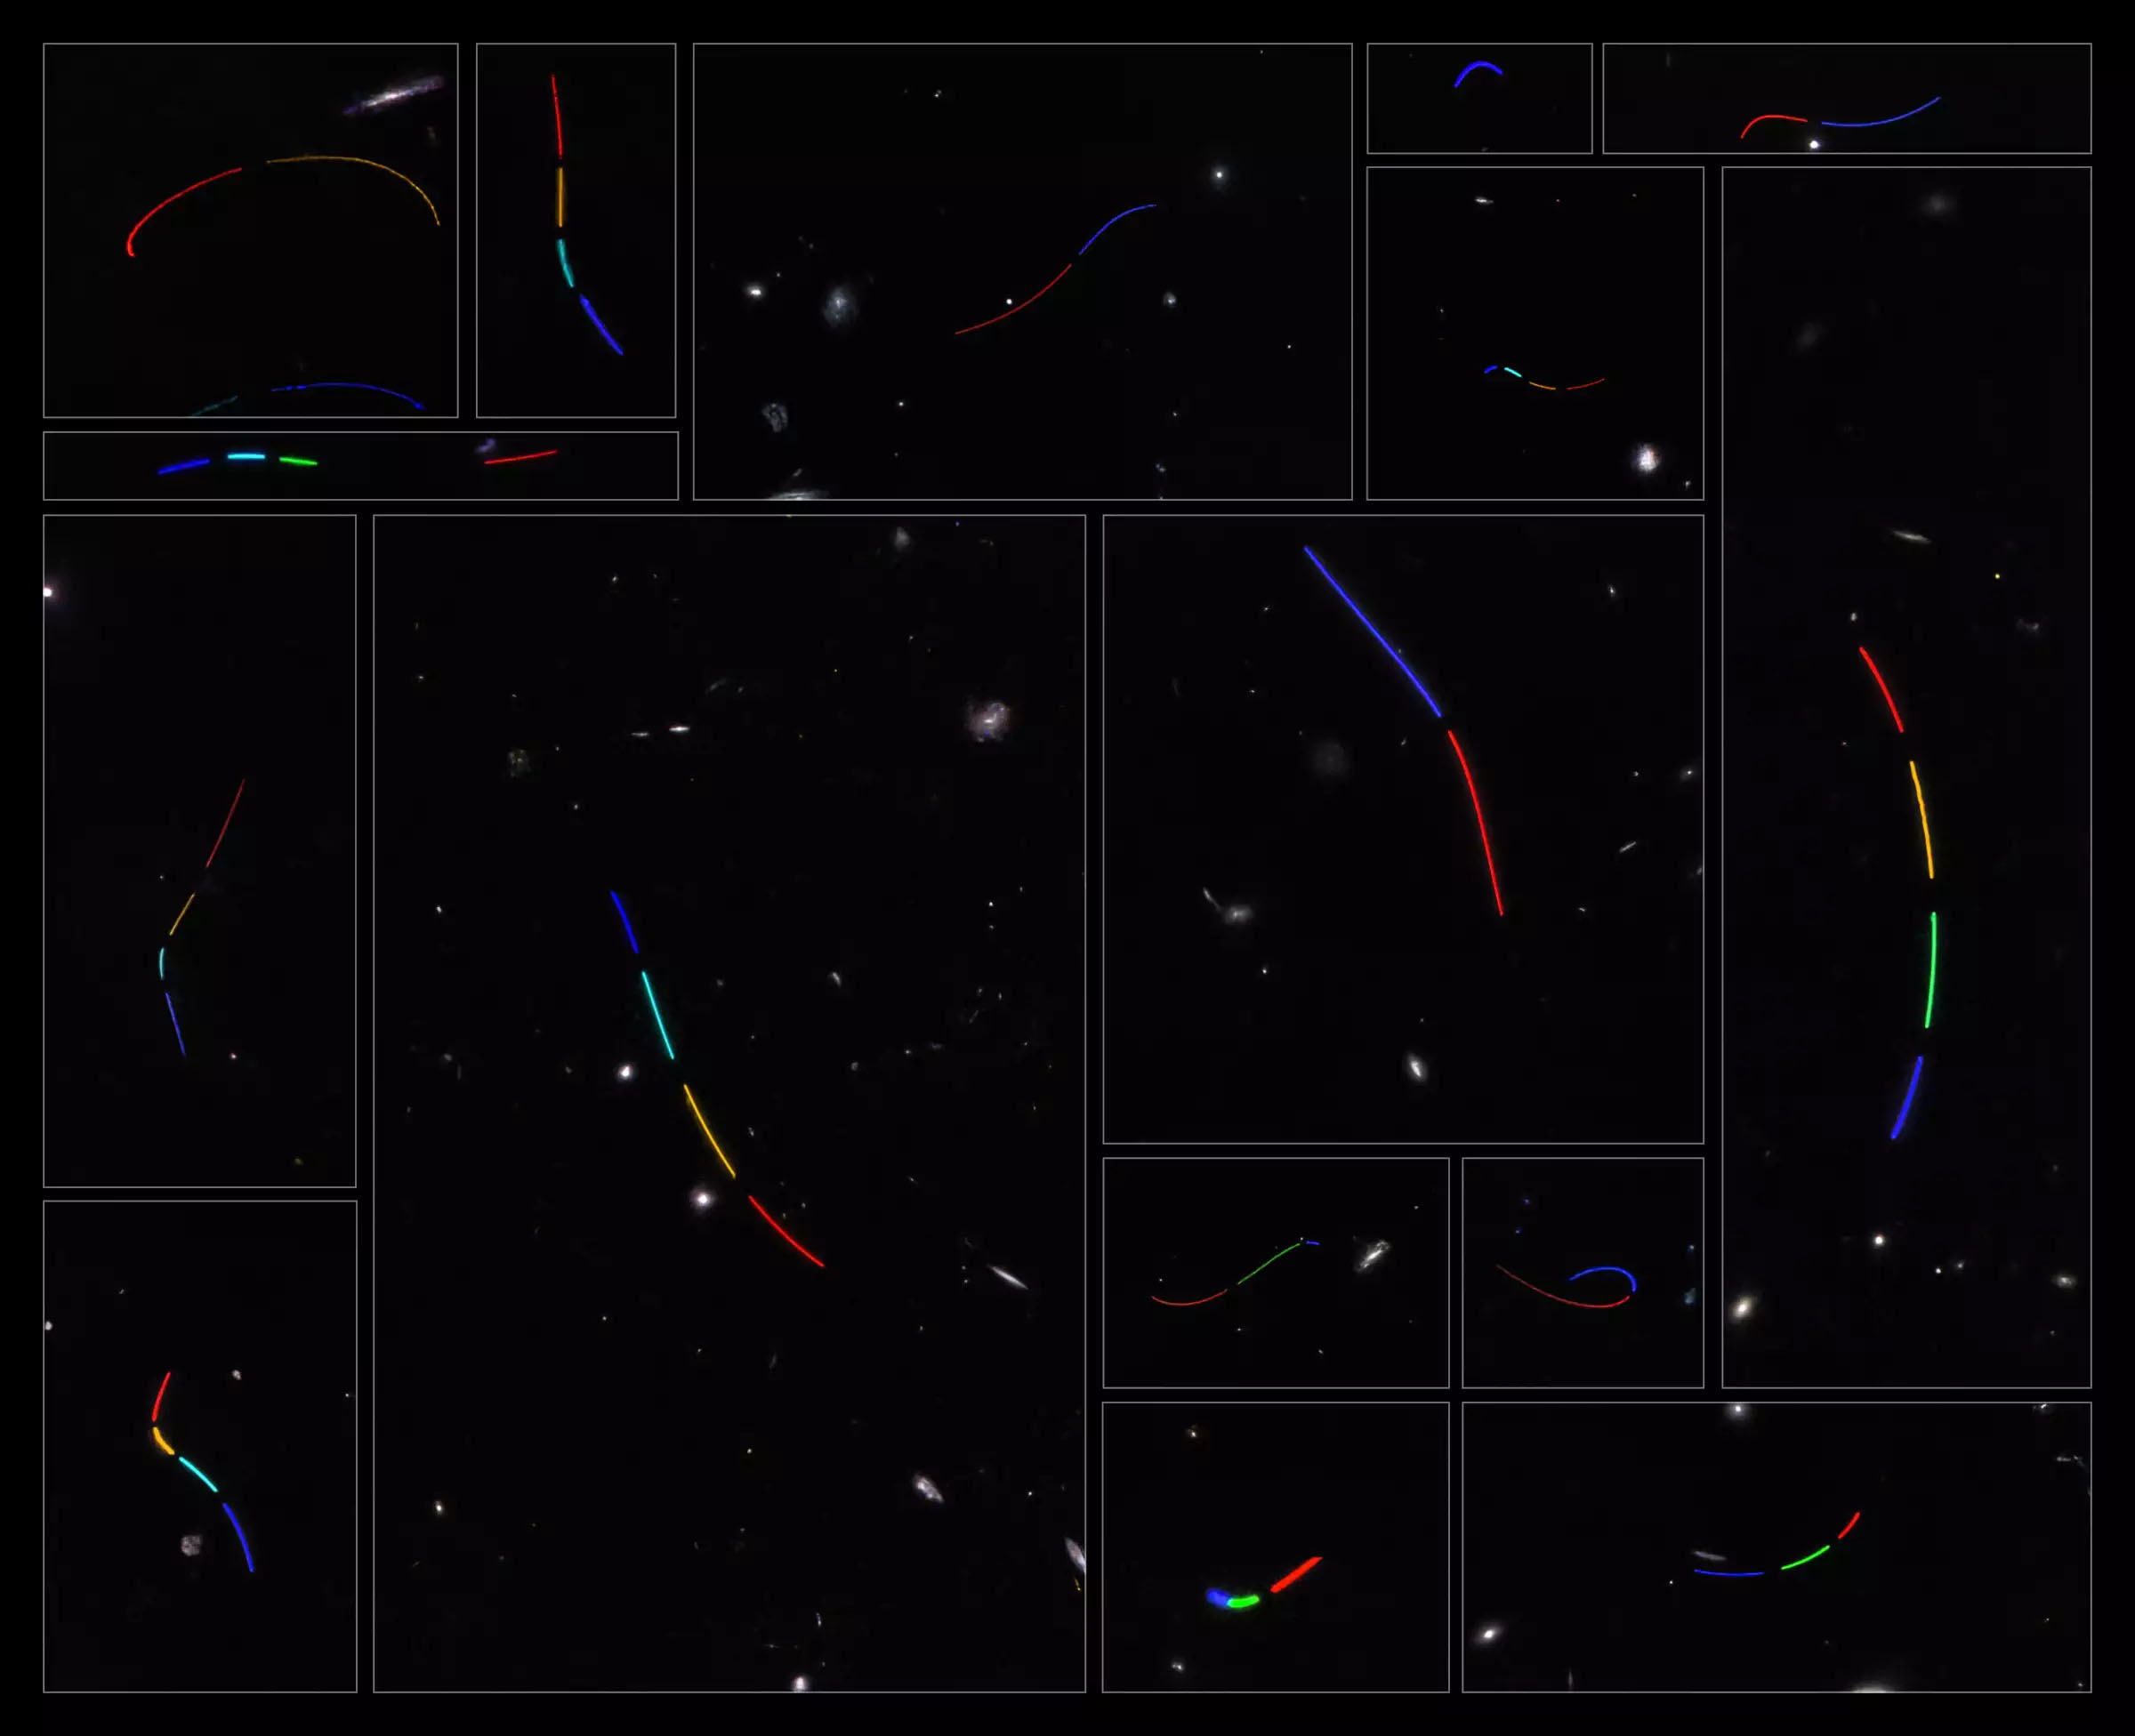 This picture consists of 16 different data sets from the Hubble Space Telescope that were studied as part of the Asteroid Hunter citizen science project